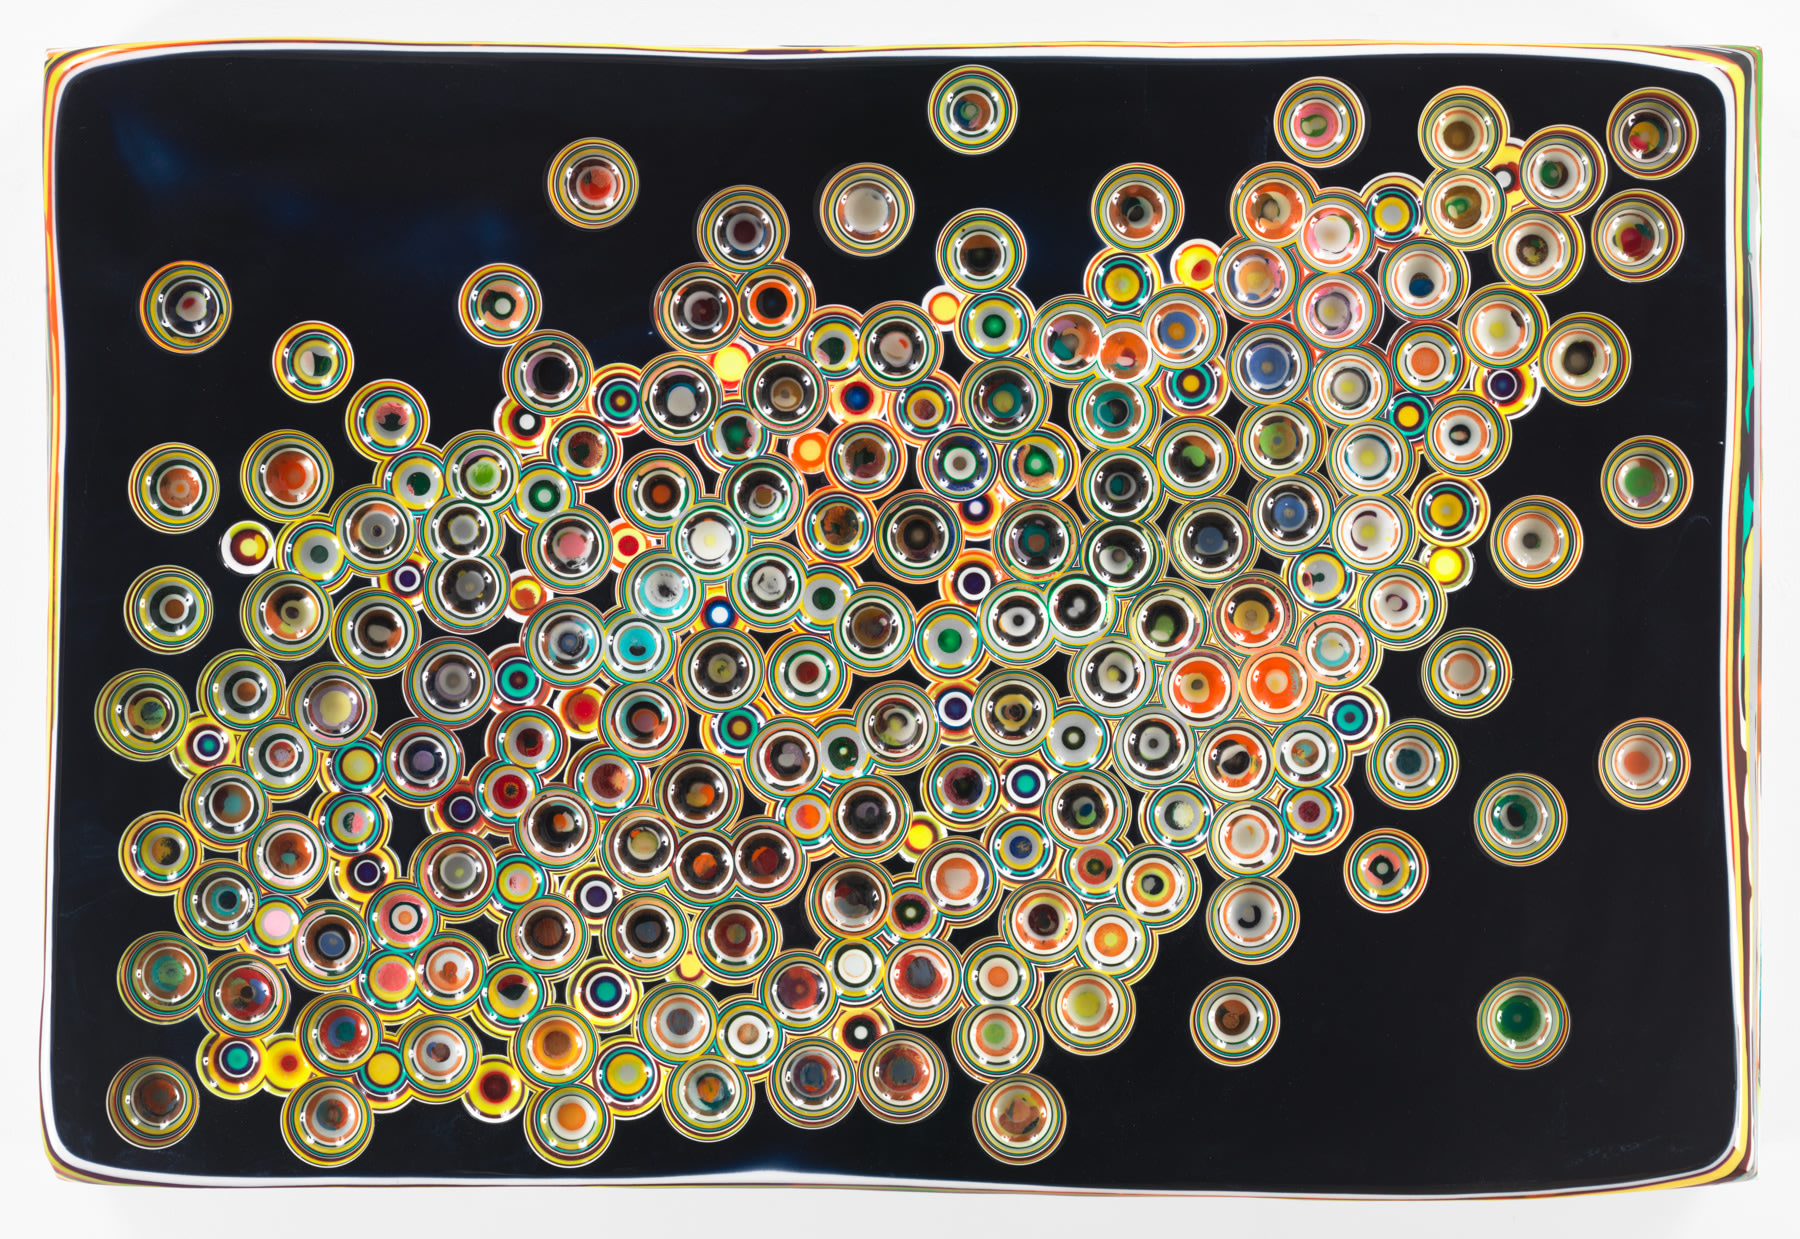 CONSTANTLYSIMULTANEOUSLY, 2016, Epoxy resin and pigments on wood, 24 x 36 inches, 61 x 91.4 cm, AMY#28219